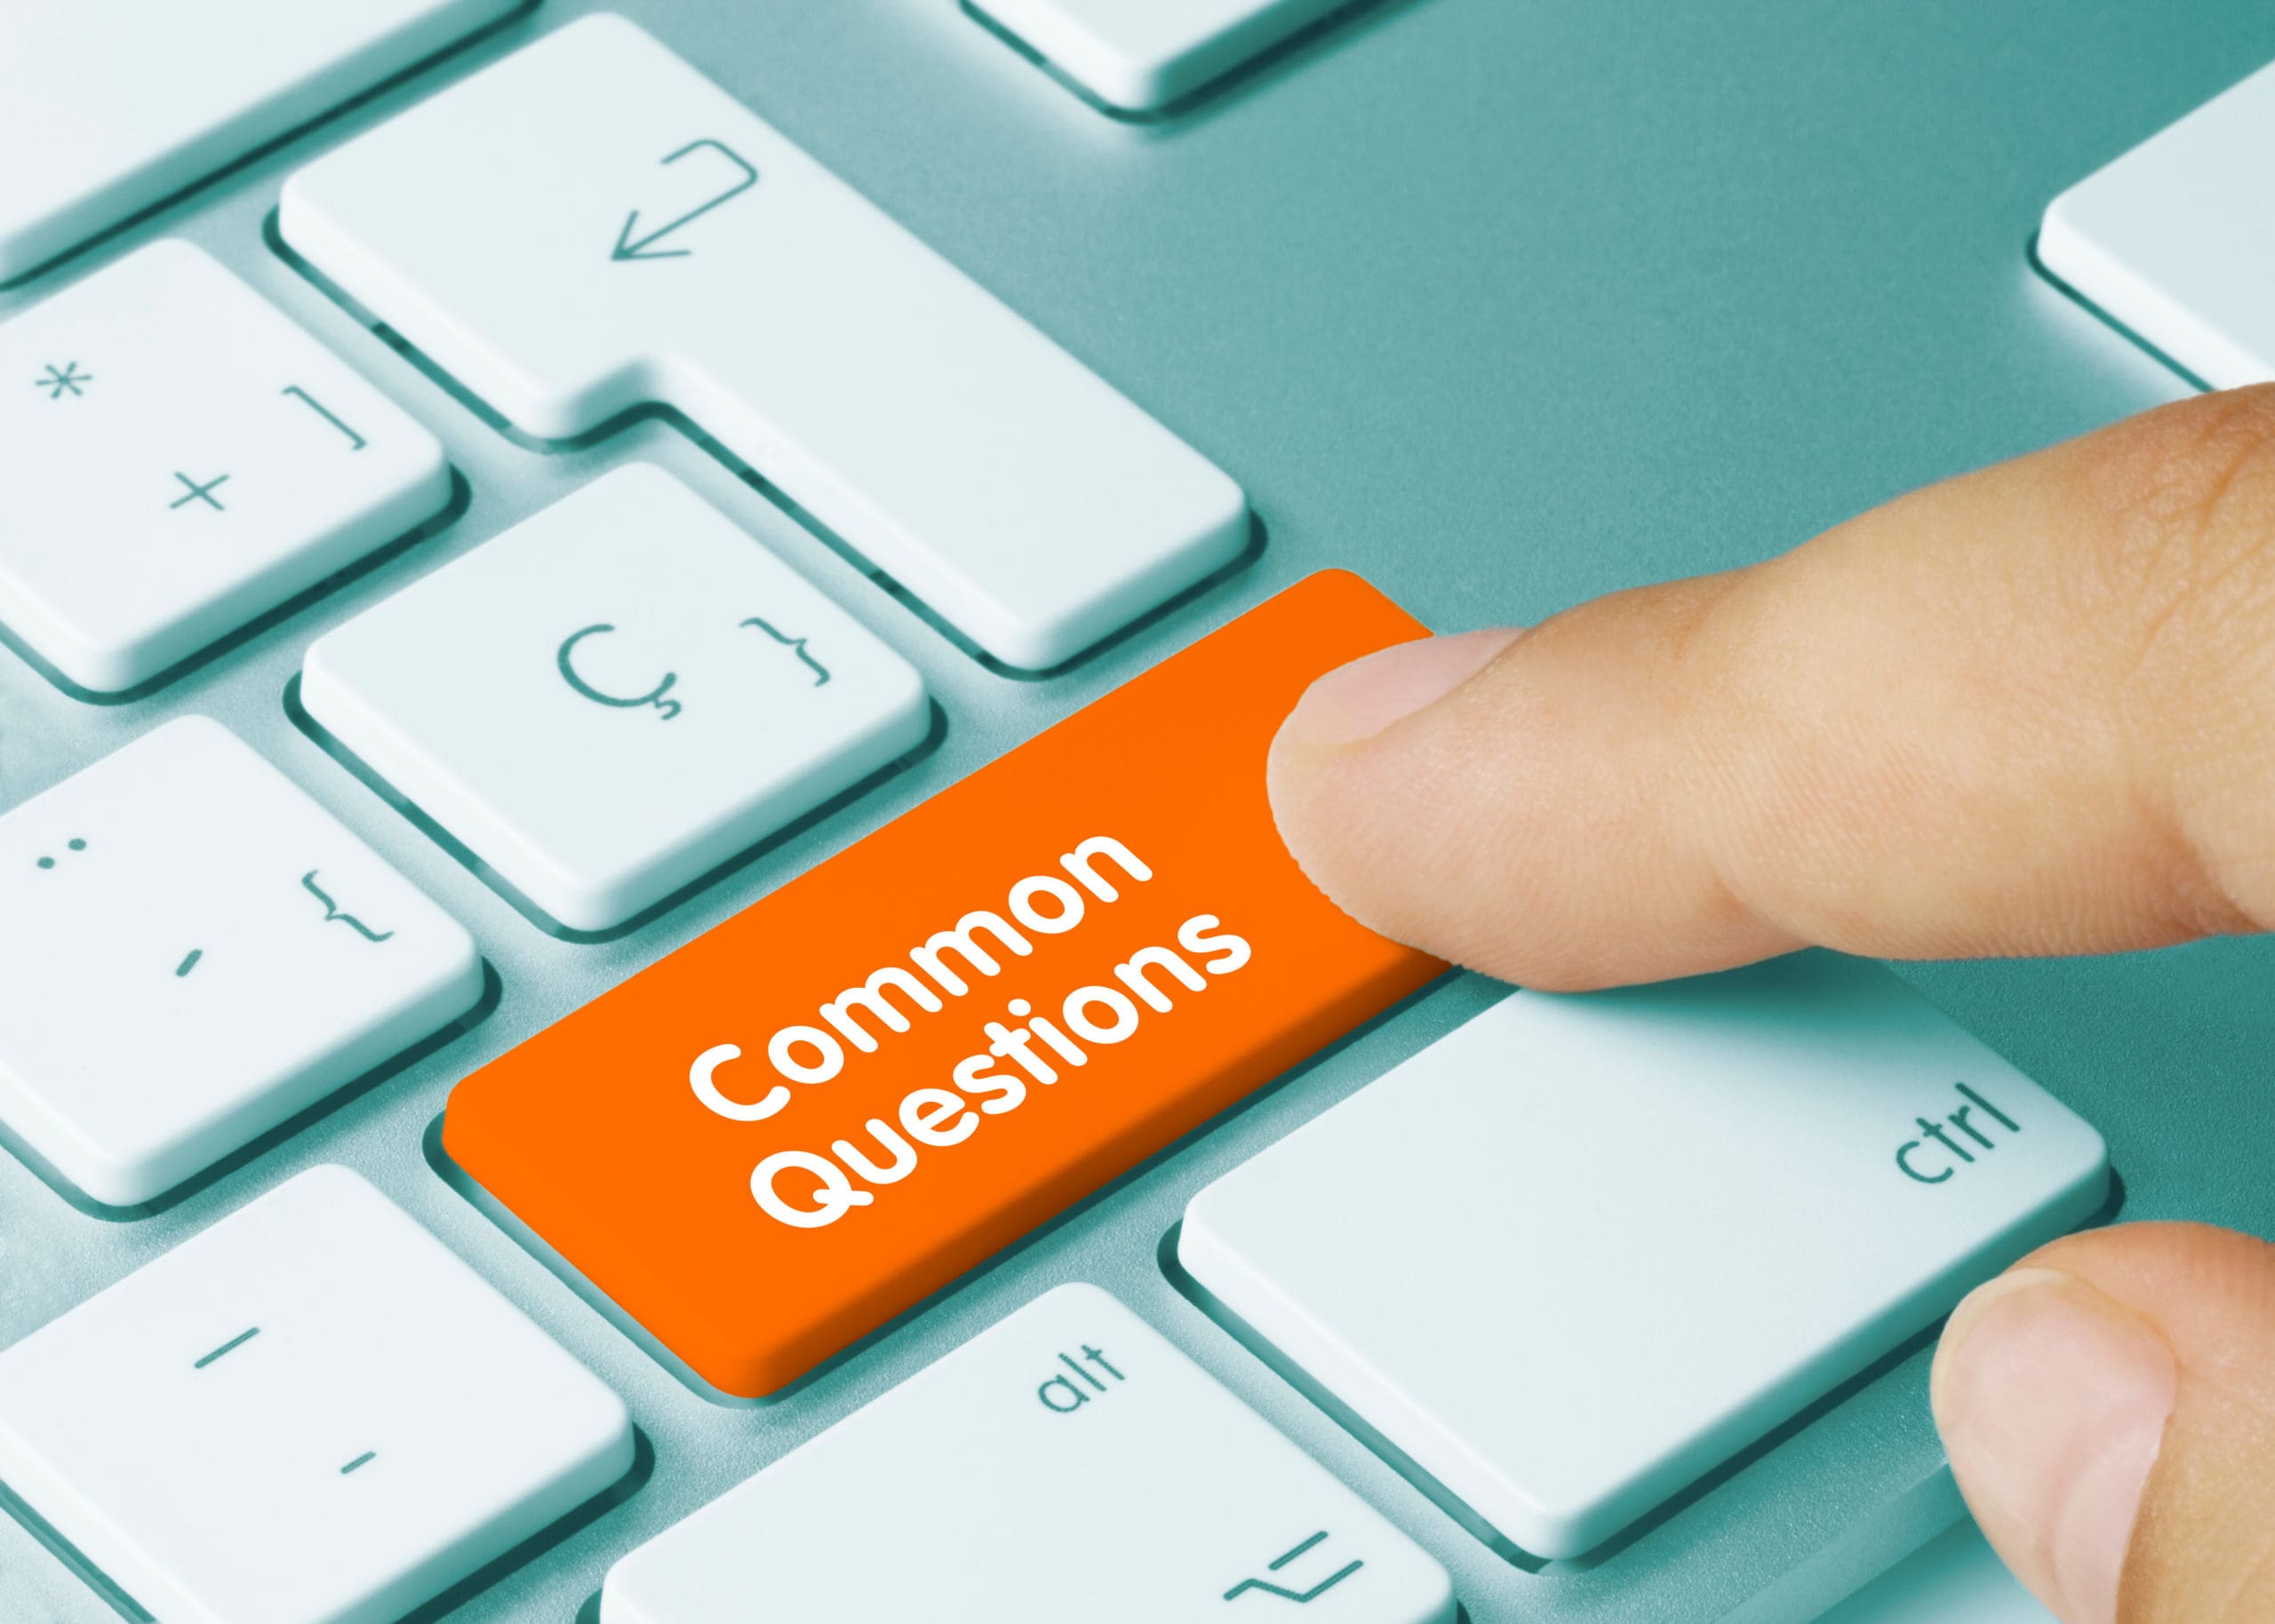 A person pressing a computer key with "common questions" on it, symbolizing a search for faqs or support.